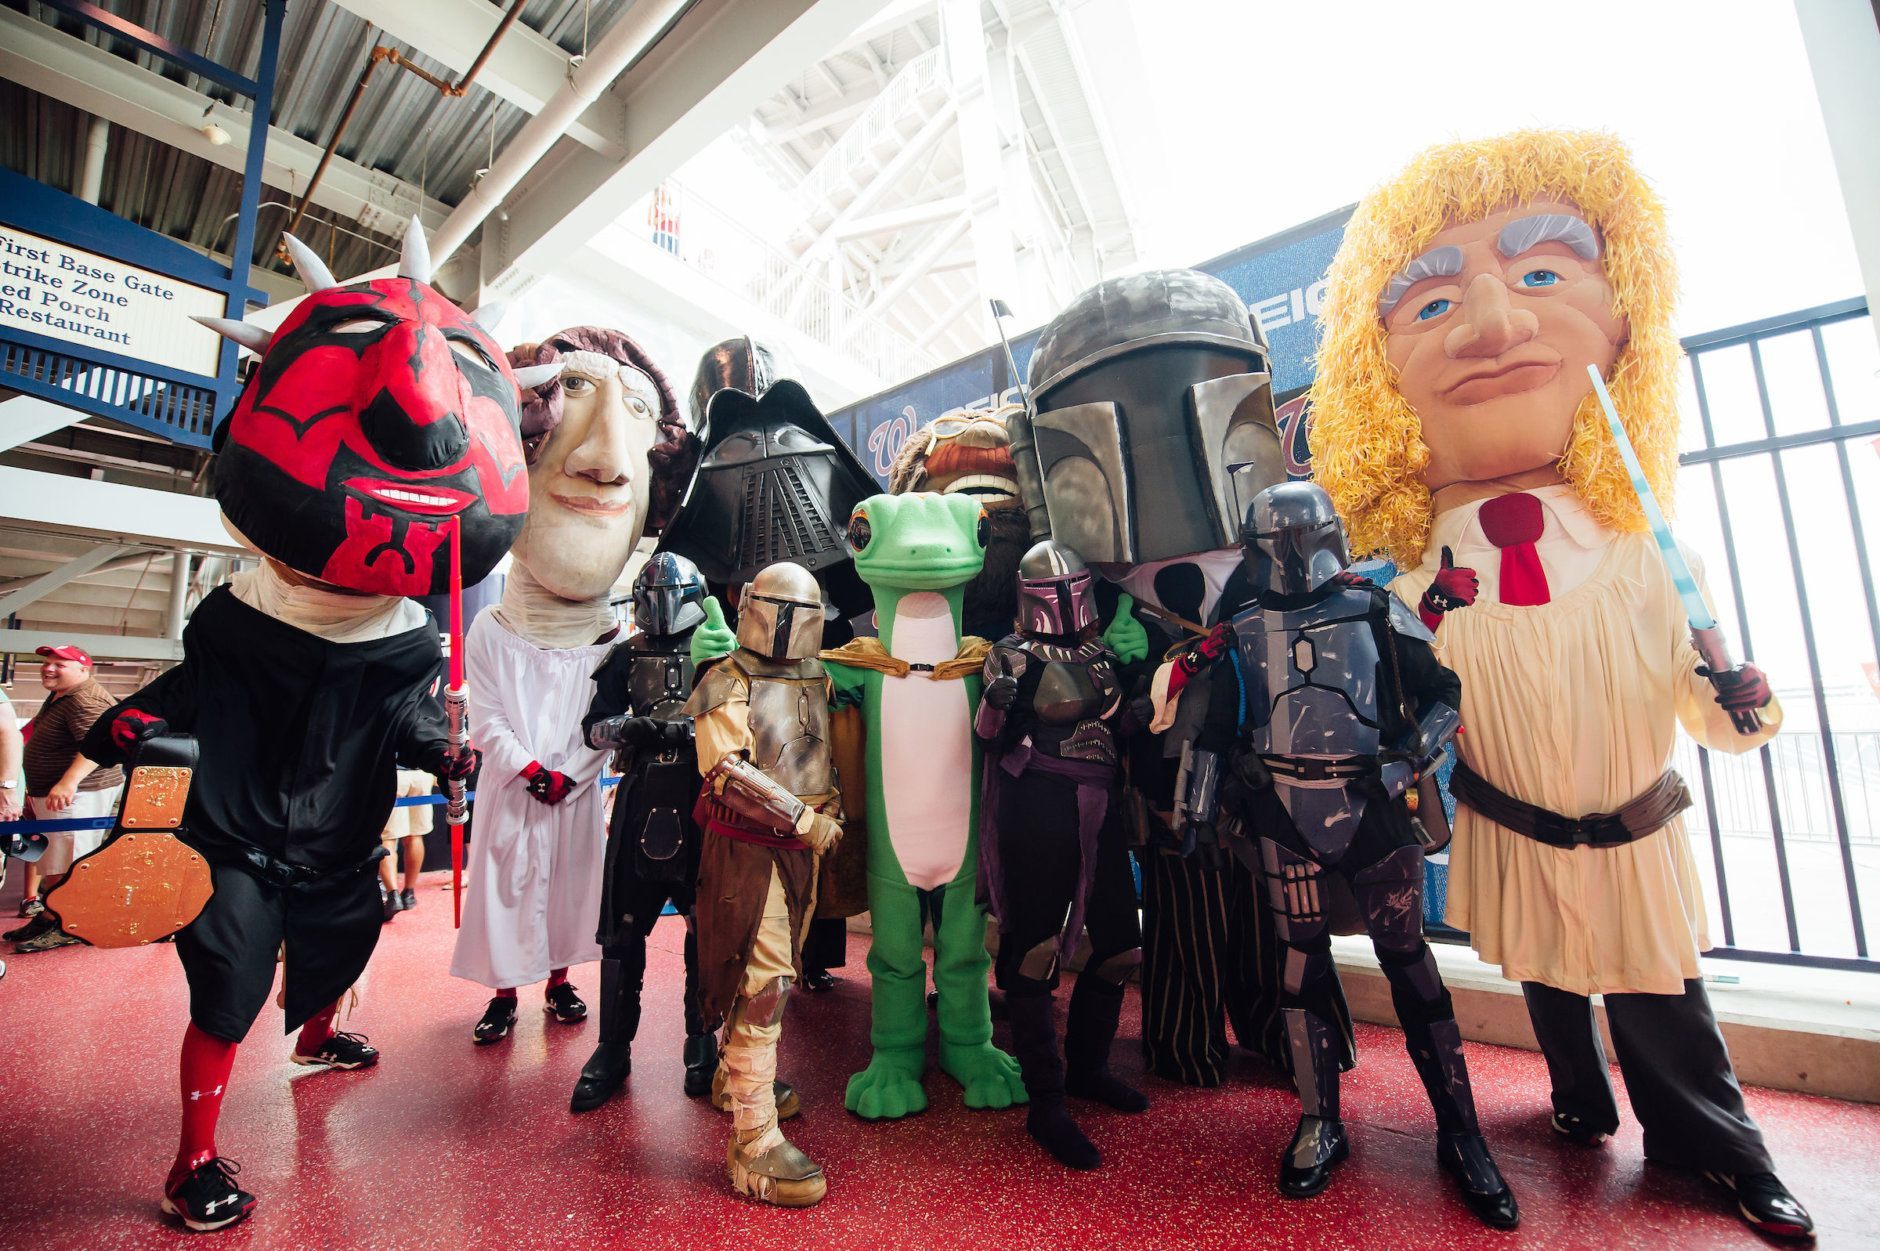 The Washington Nationals host the franchise's first-ever "Star Wars Day" at Nationals Park on July 19, 2015 in Washington DC.  (Paul Kim for the Washington Nationals)